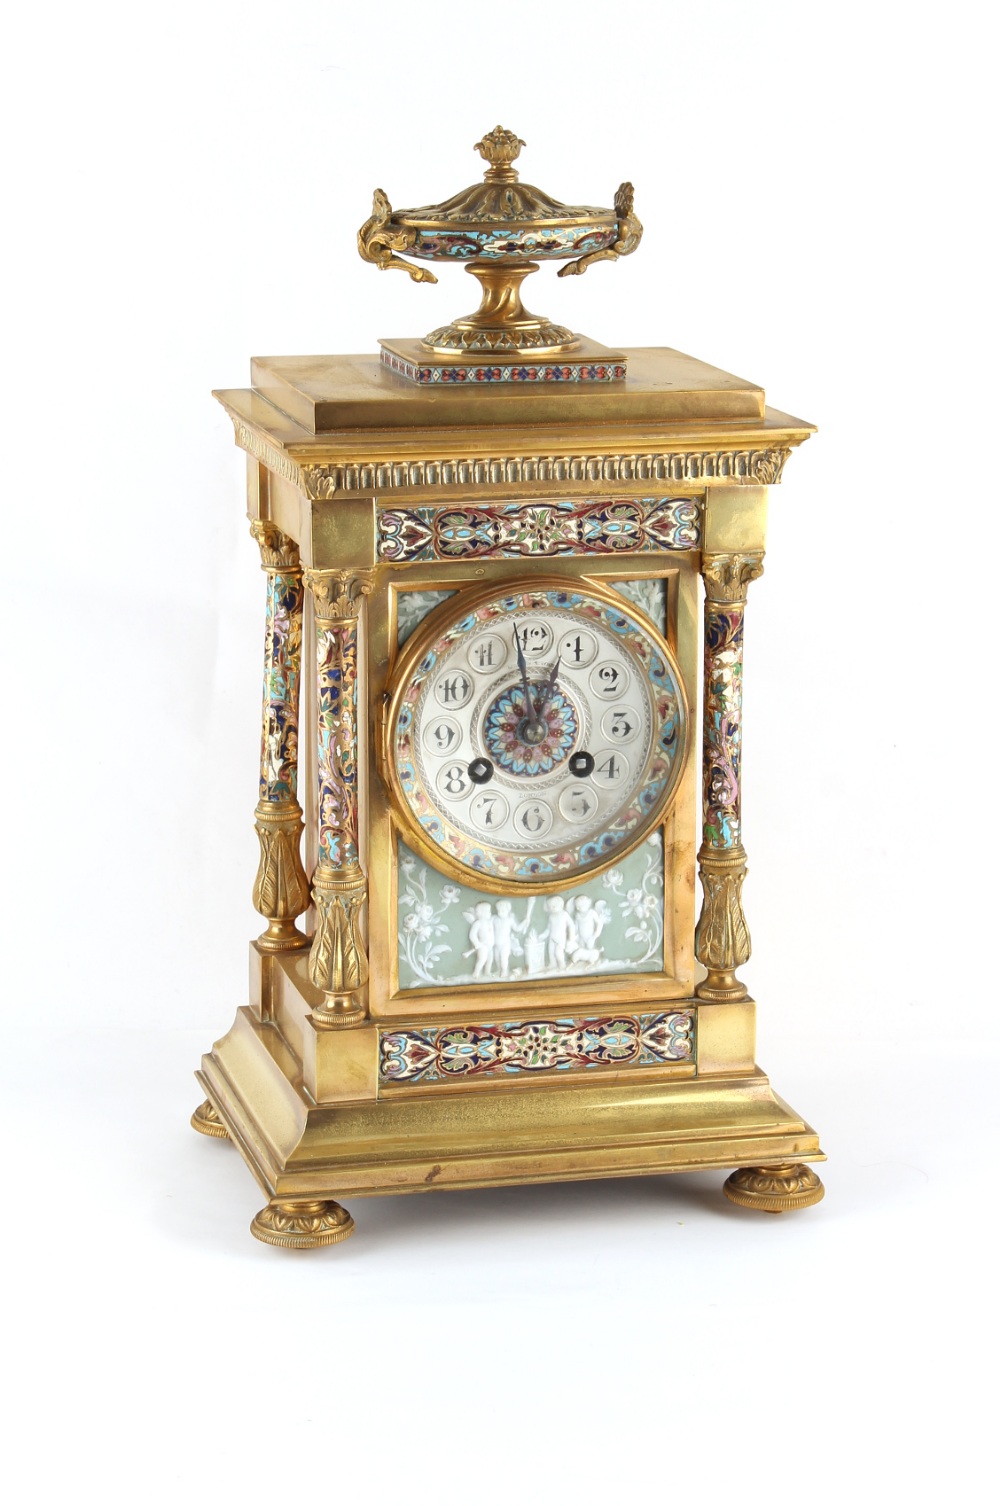 Property of a deceased estate - a late 19th century French gilt brass & cloisonne cased mantel clock